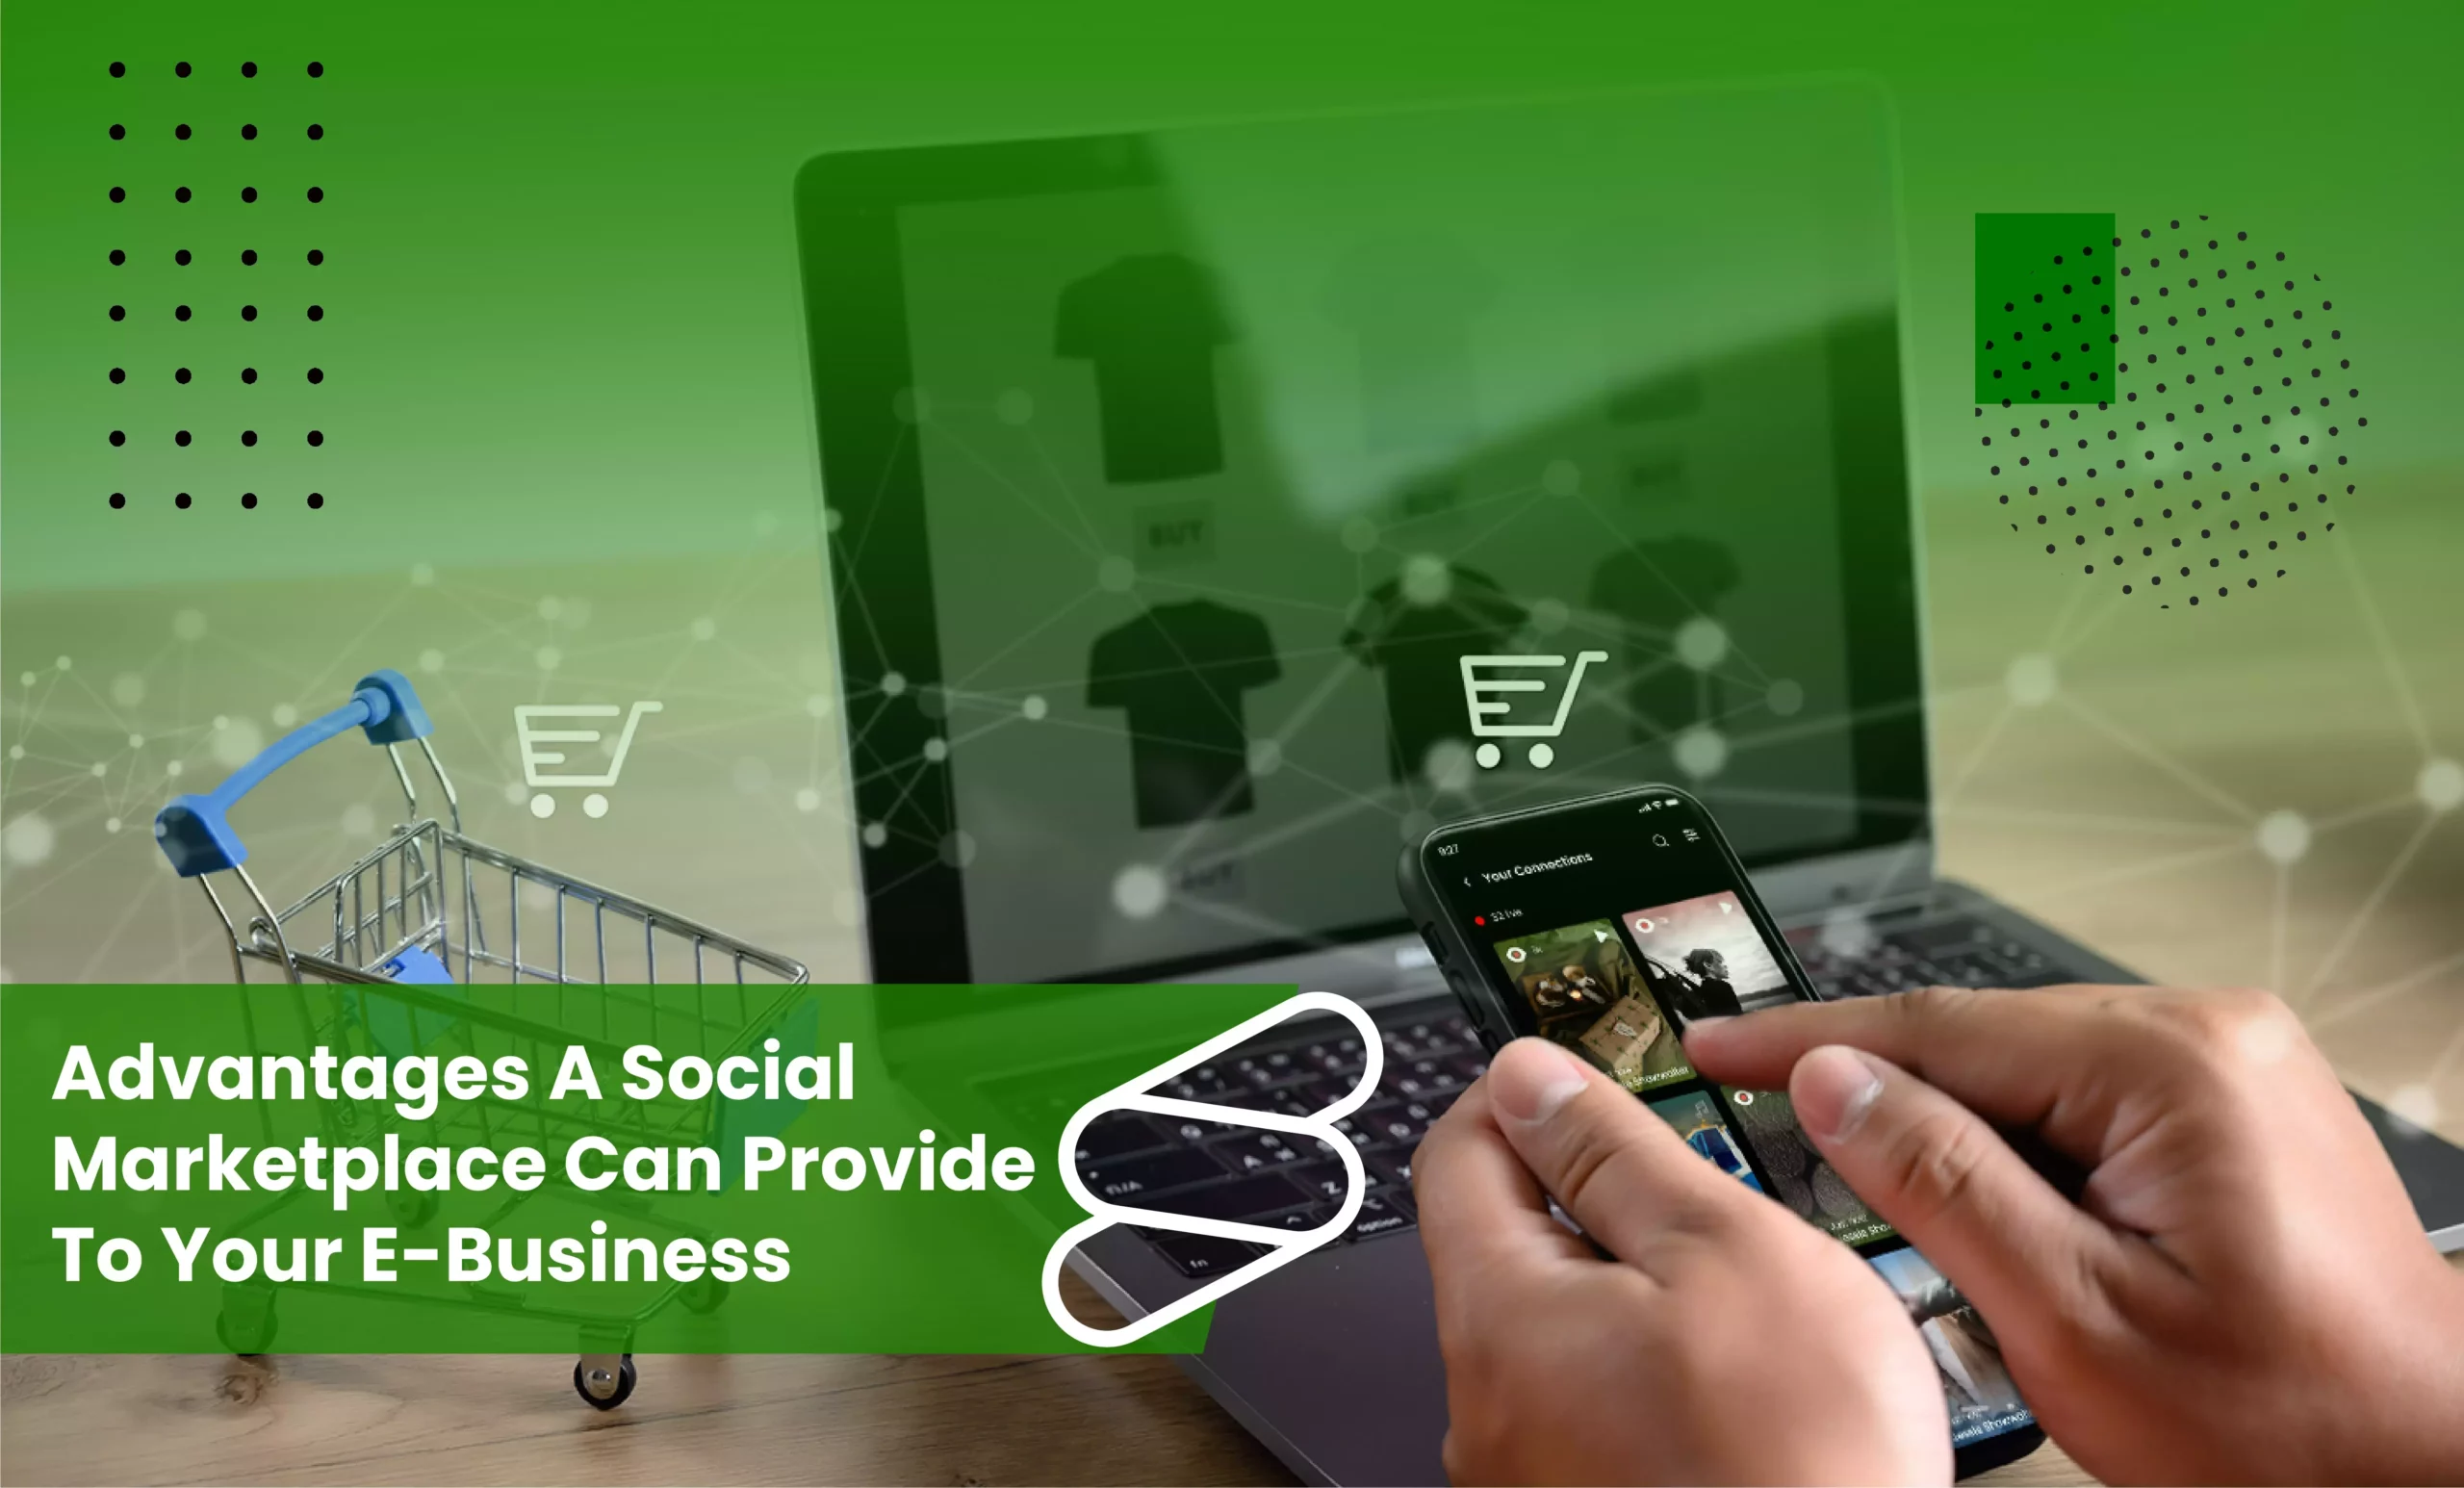 Ultimate Advantages A Social Marketplace Can Provide To Your E-Business